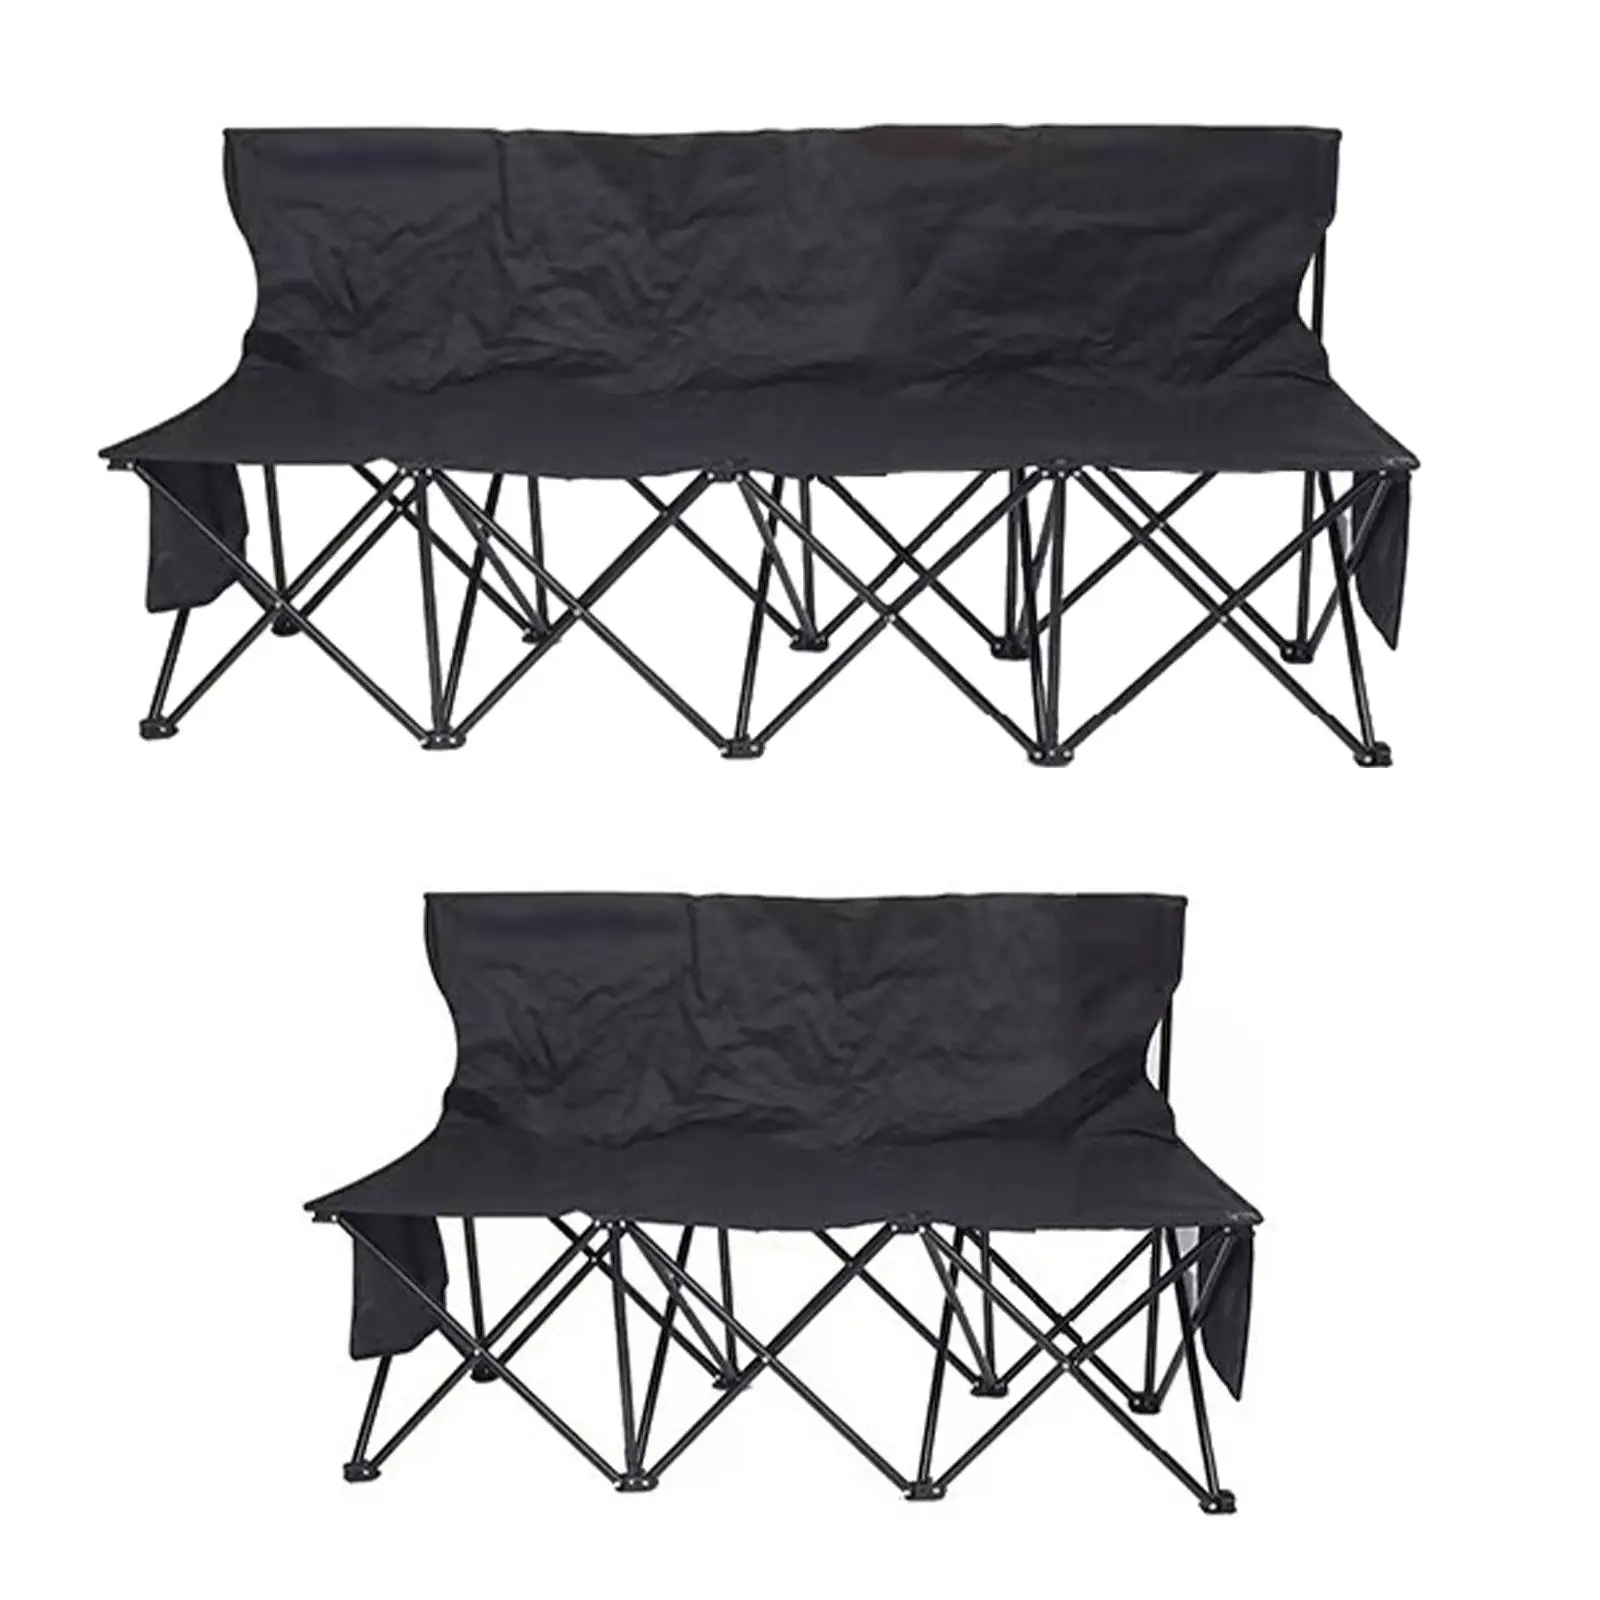 Folding Bench for Sports Team Lightweight Portable Sideline Bench Foldable for Campsites Picnic Outdoor Events Soccer Football